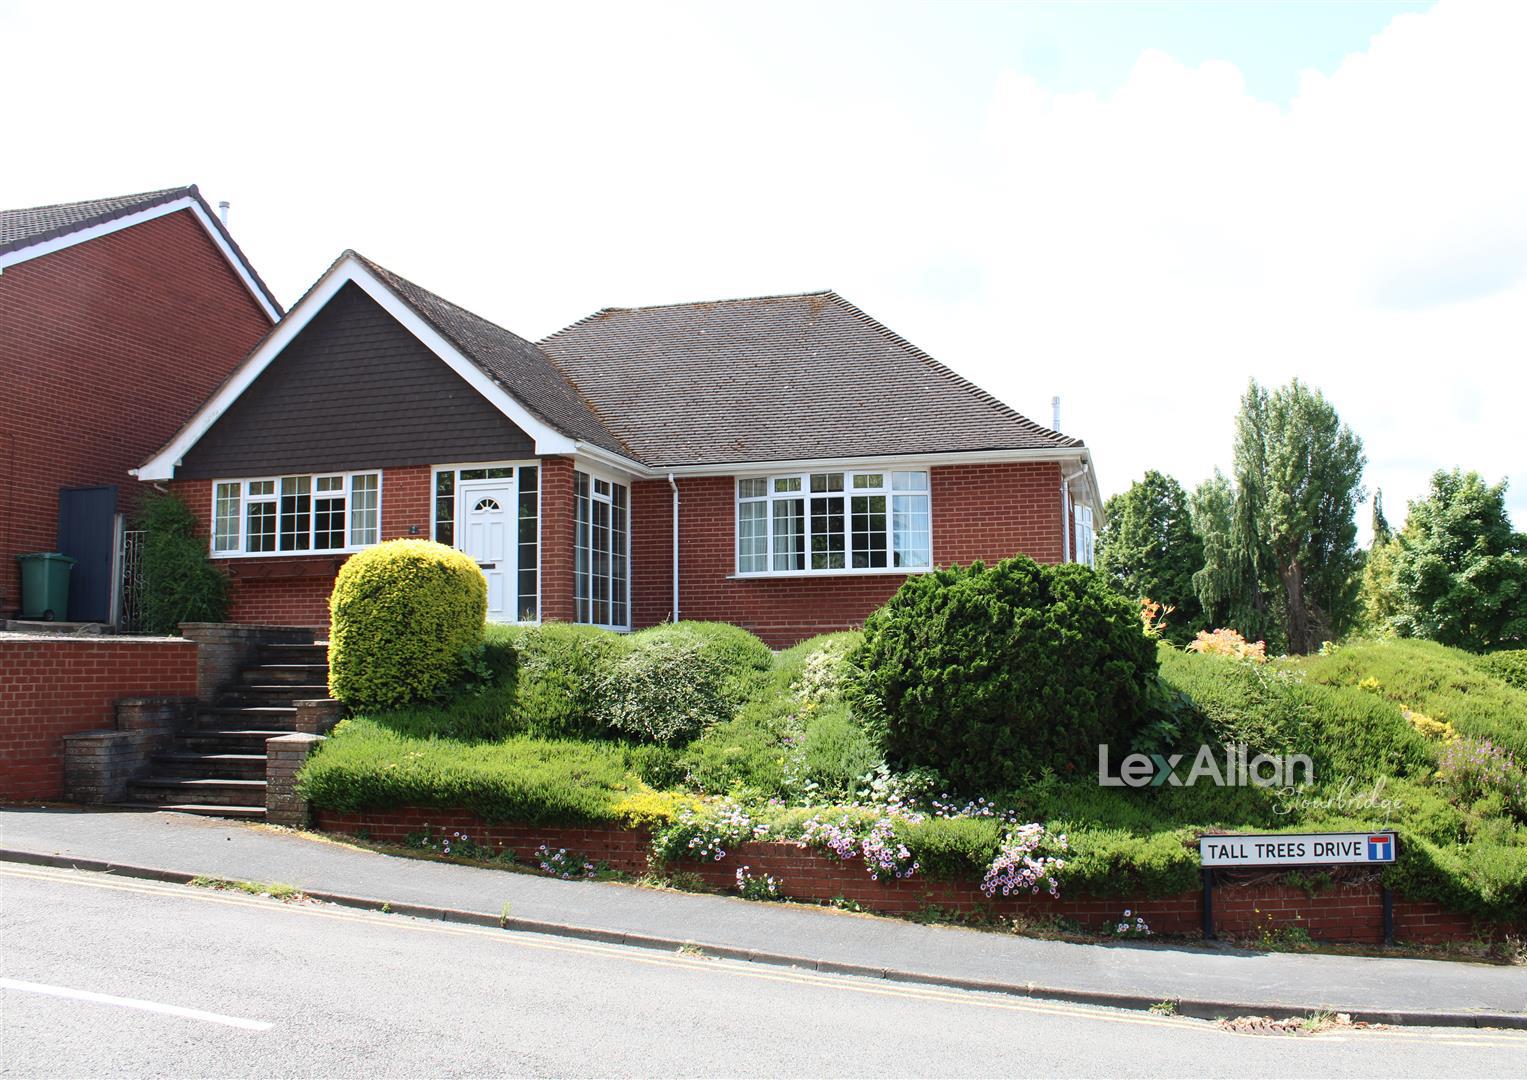 3 bed detached bungalow for sale in Tall Trees Drive, Stourbridge - Property Image 1